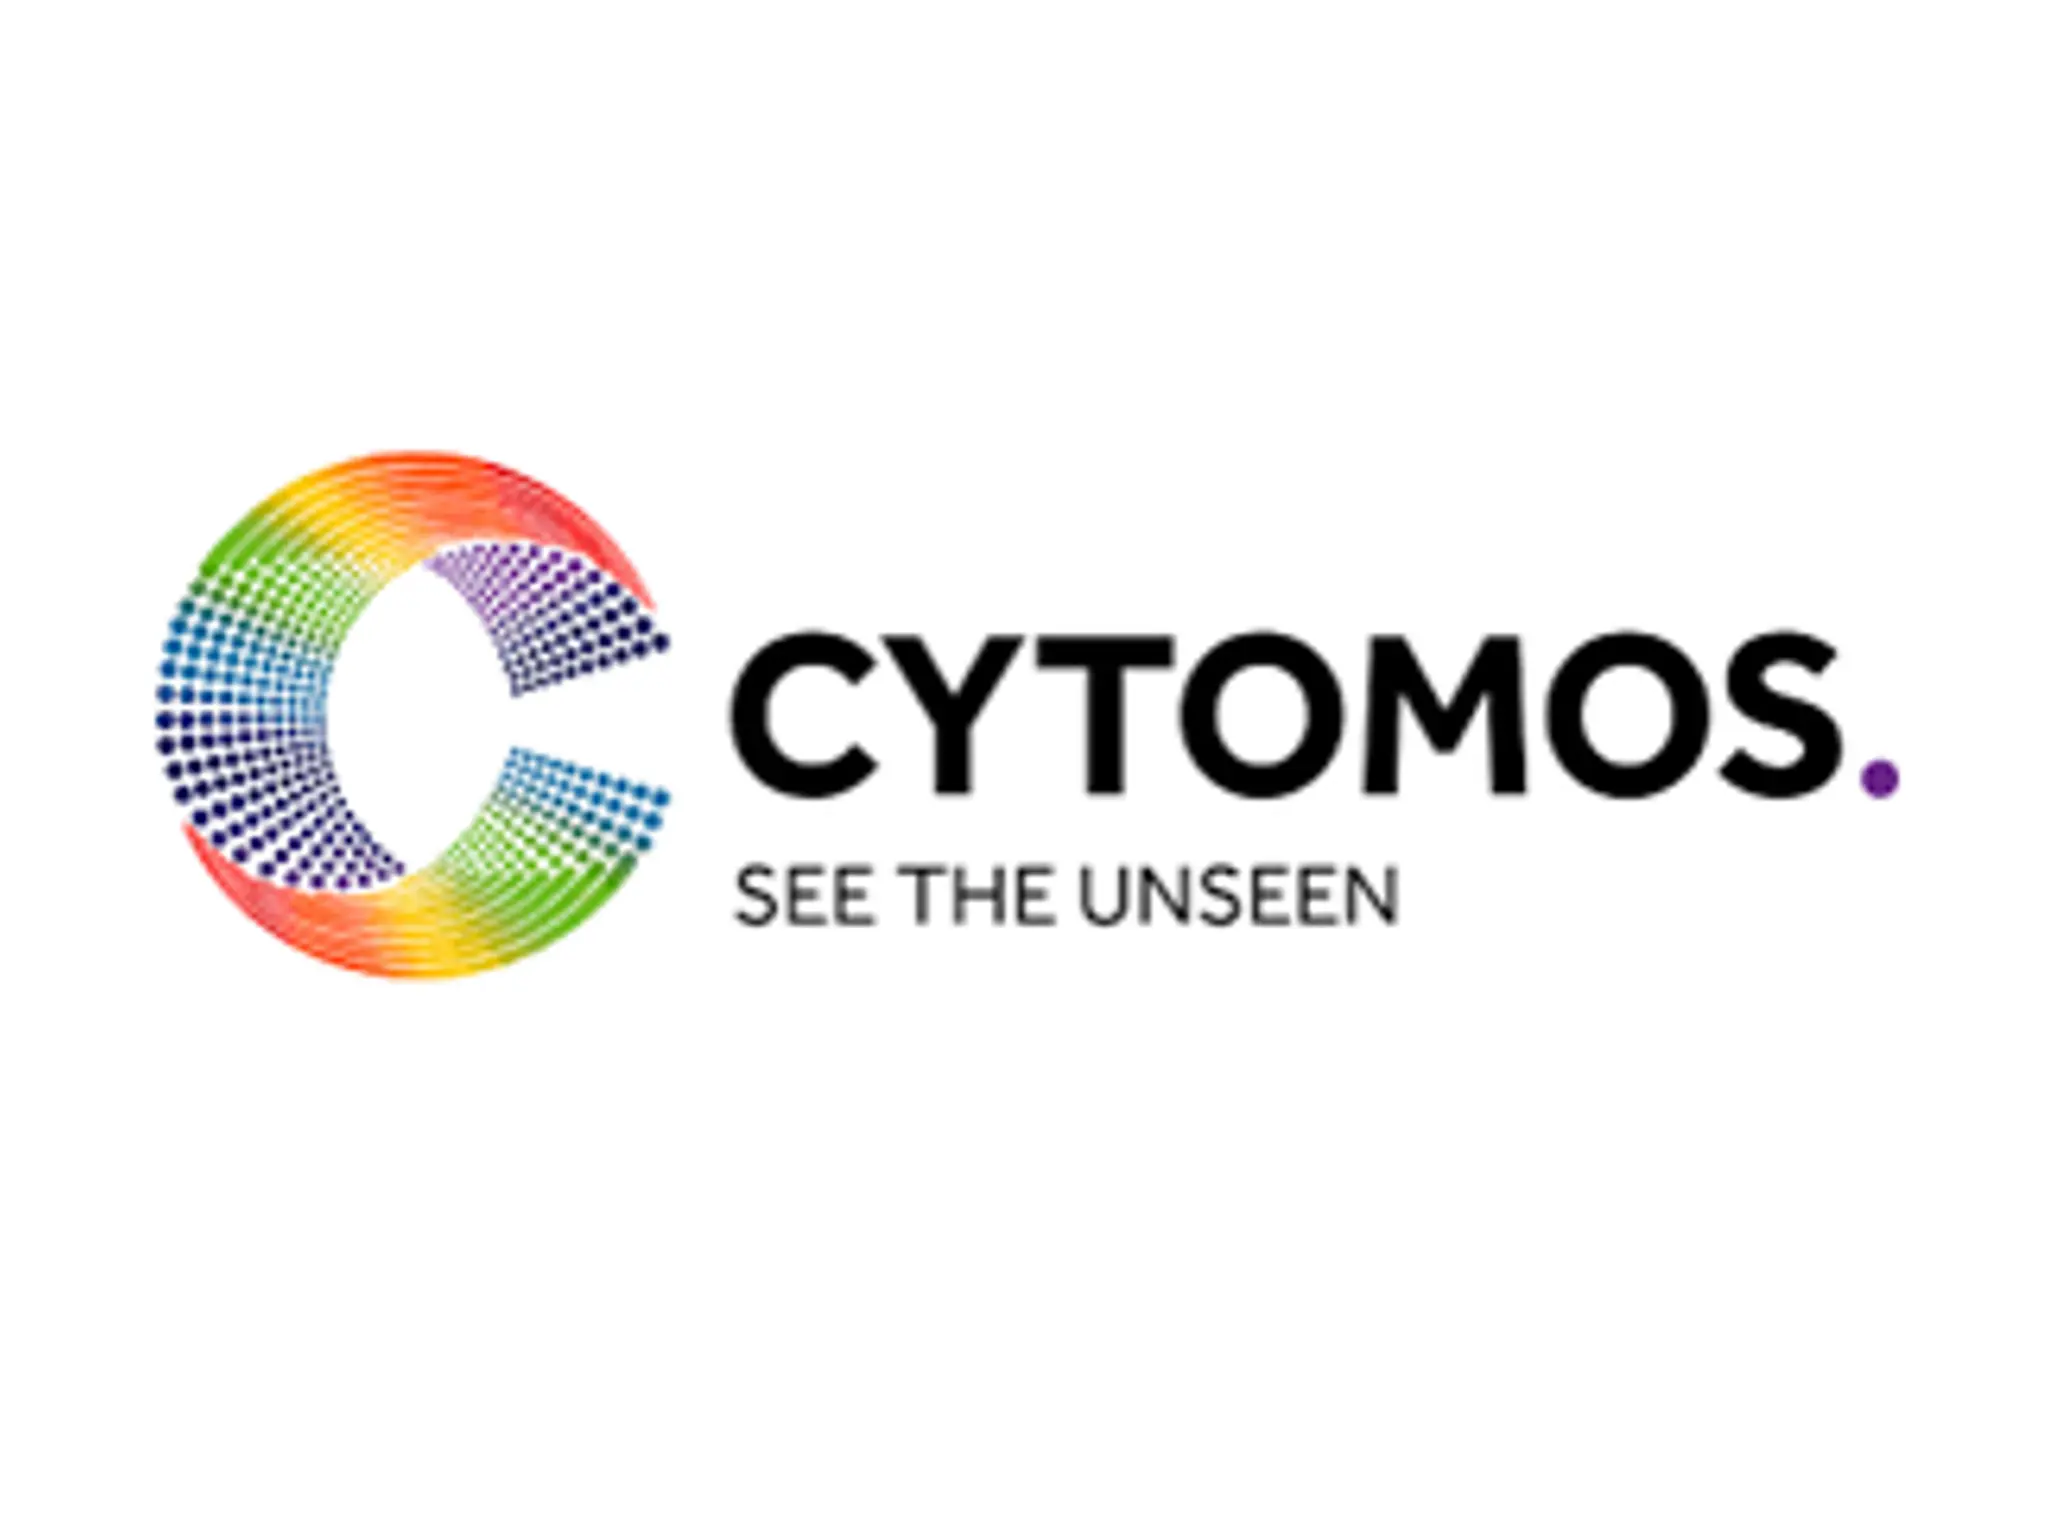 Cytomos Selected to Showcase CDS Cell Analysis Technology at BIA’s Bioprocessuk Dragon’s Den Session